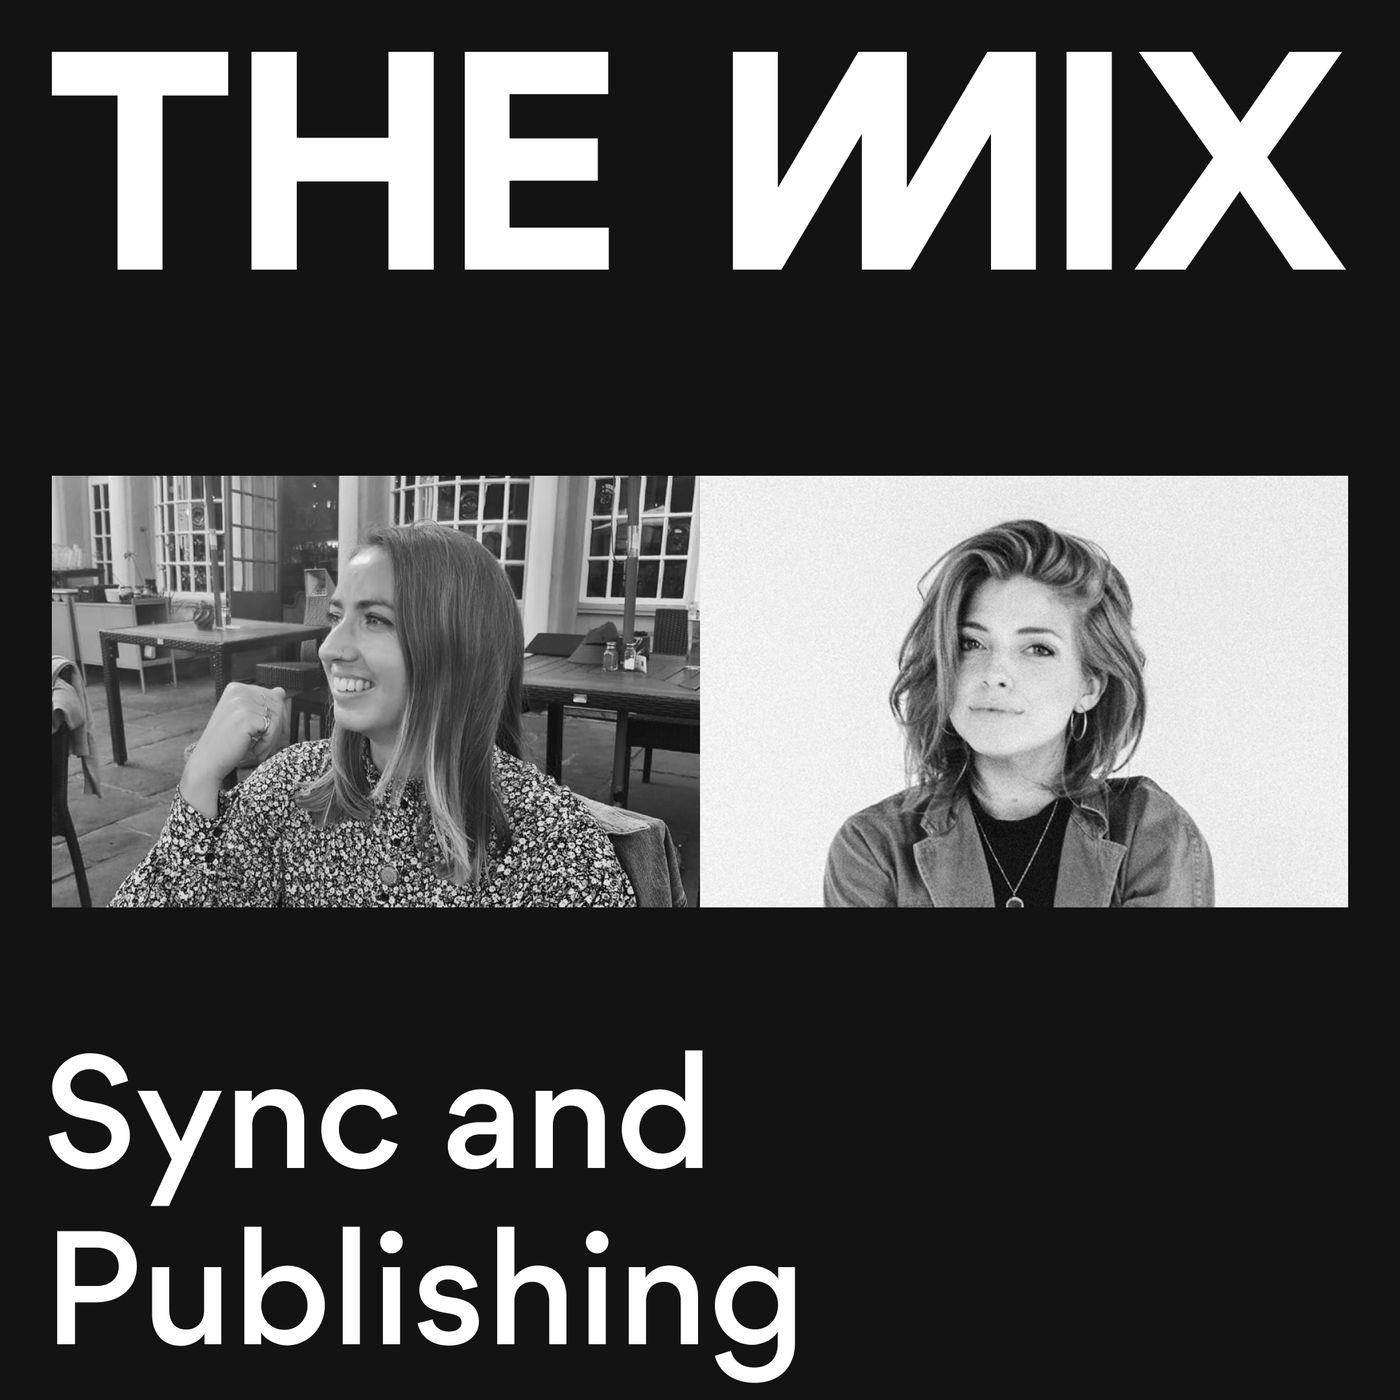 Sync and Licensing